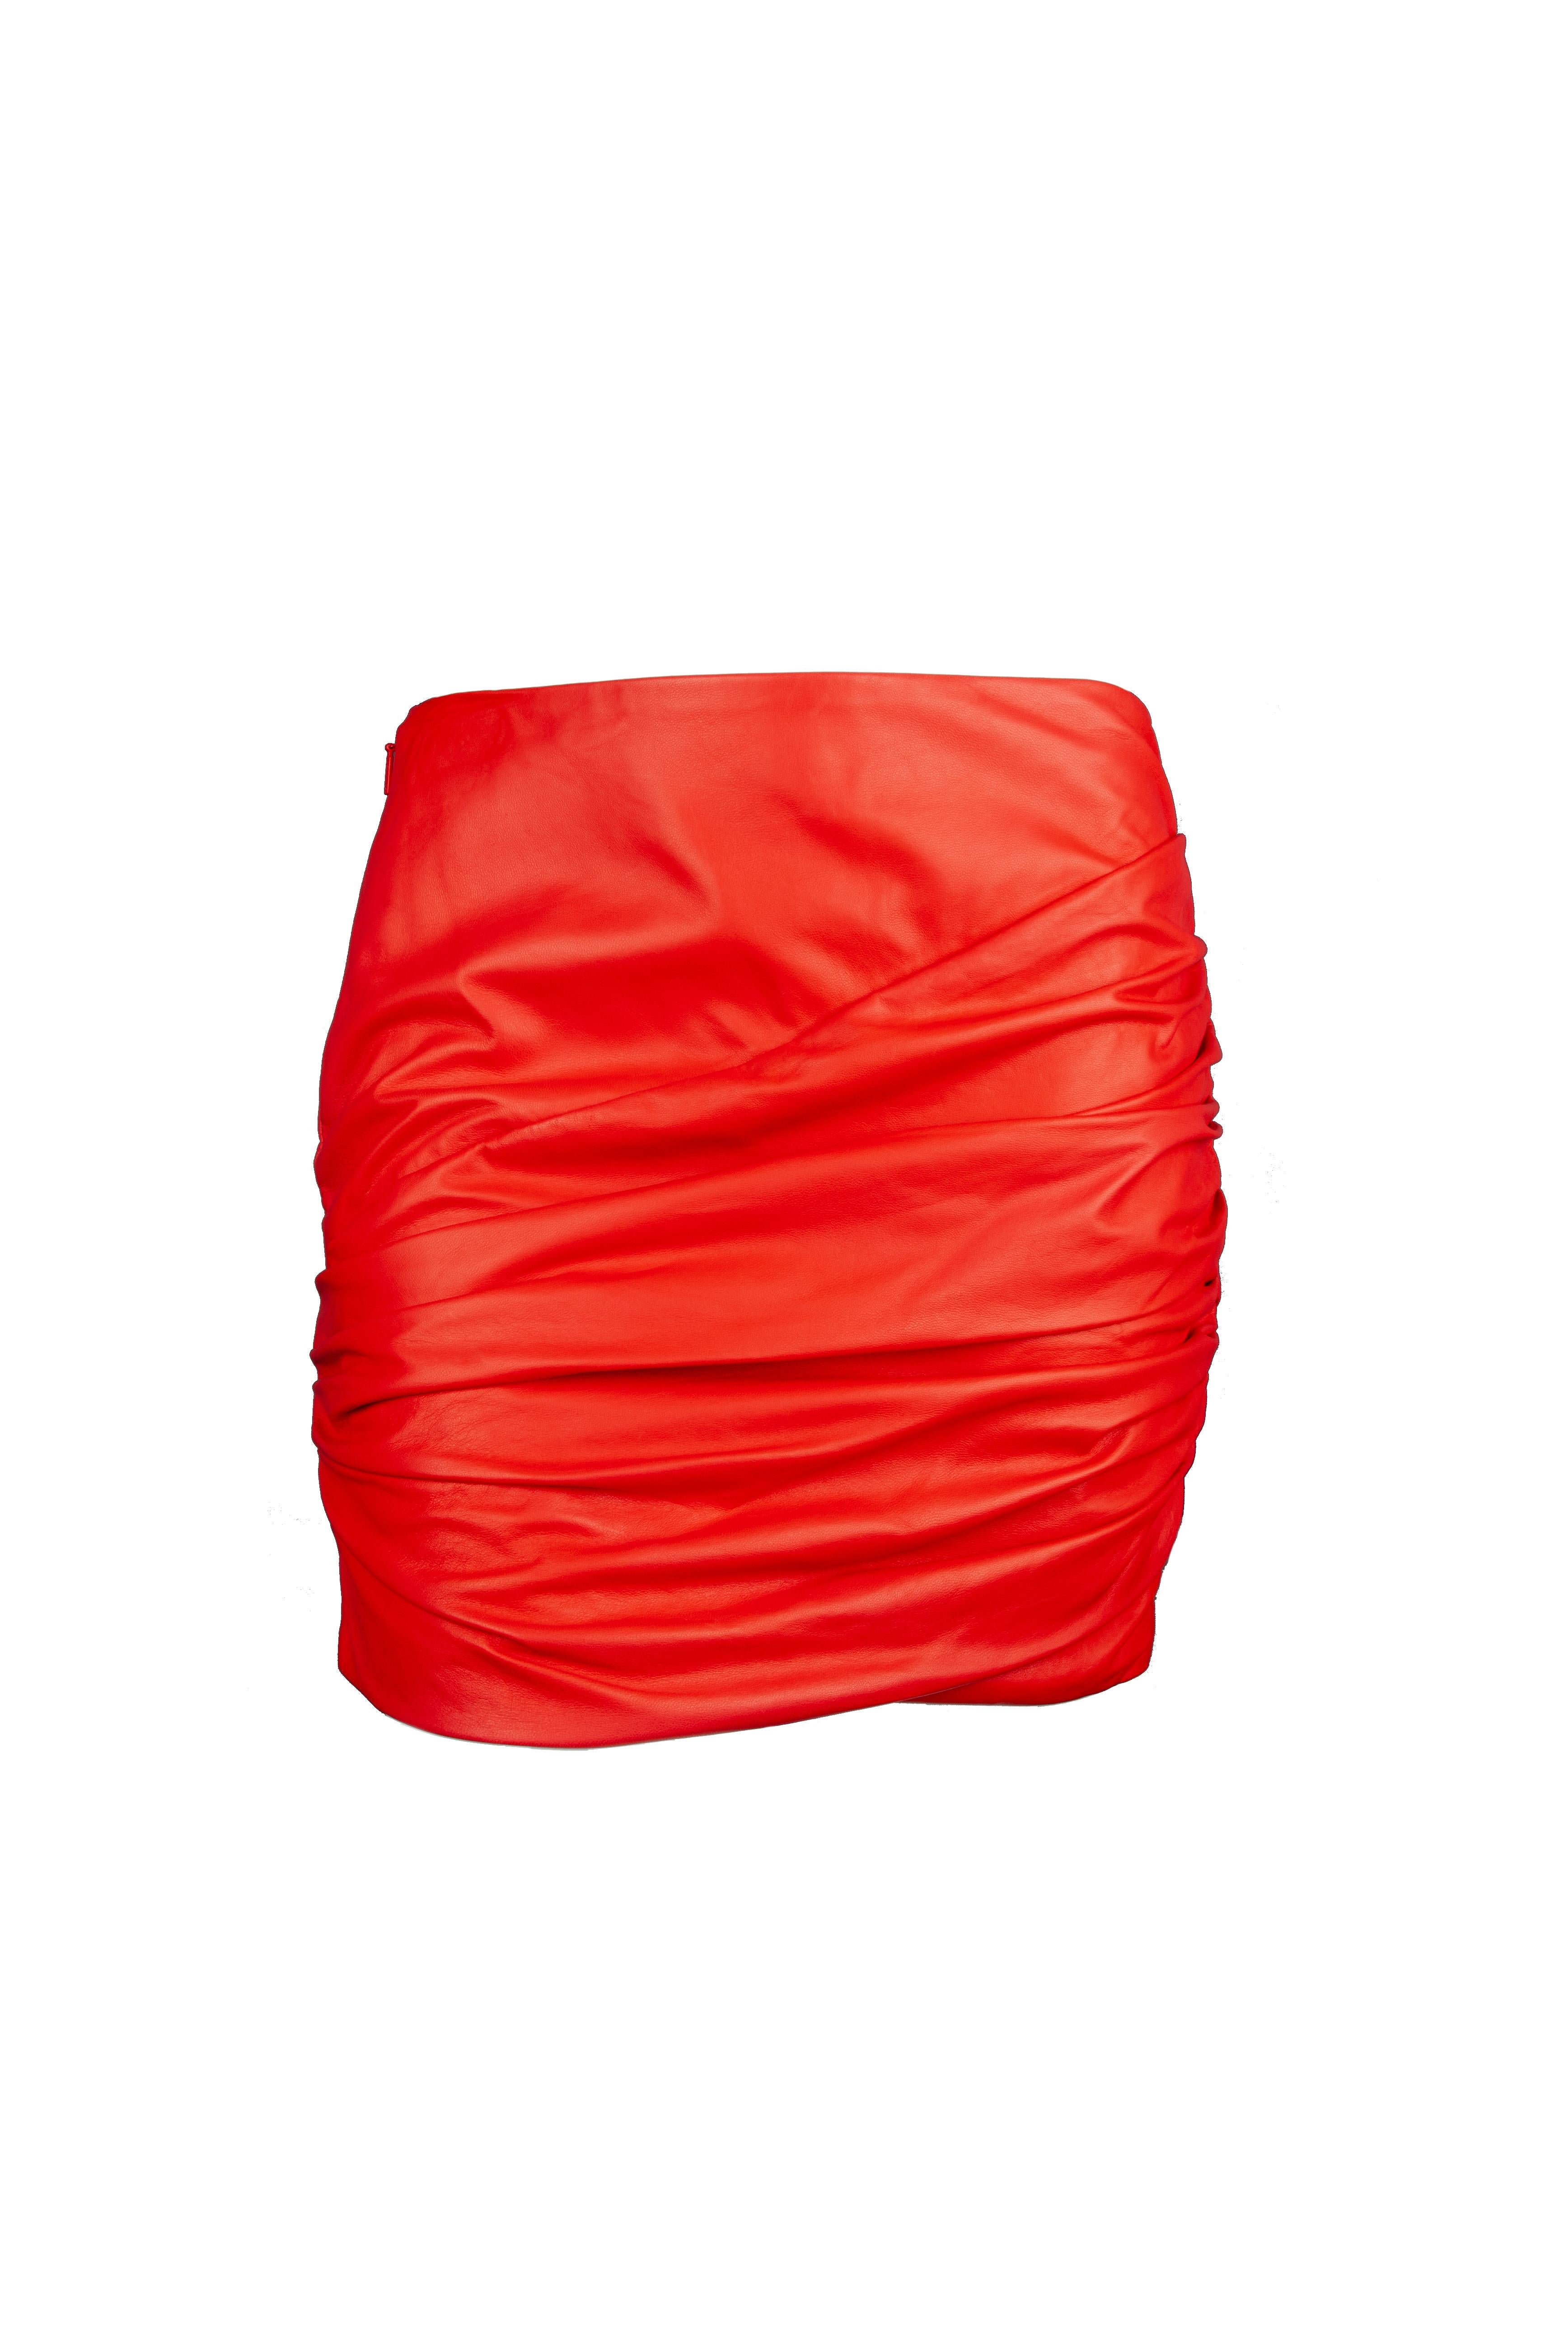 This Versace red mini skirt features asymmetric ruching, lambskin leather and a side zip fastening. The soft red leather is perfect for a bold statement. To recreate the runway look, pair it with the blue leather top also available at our store.